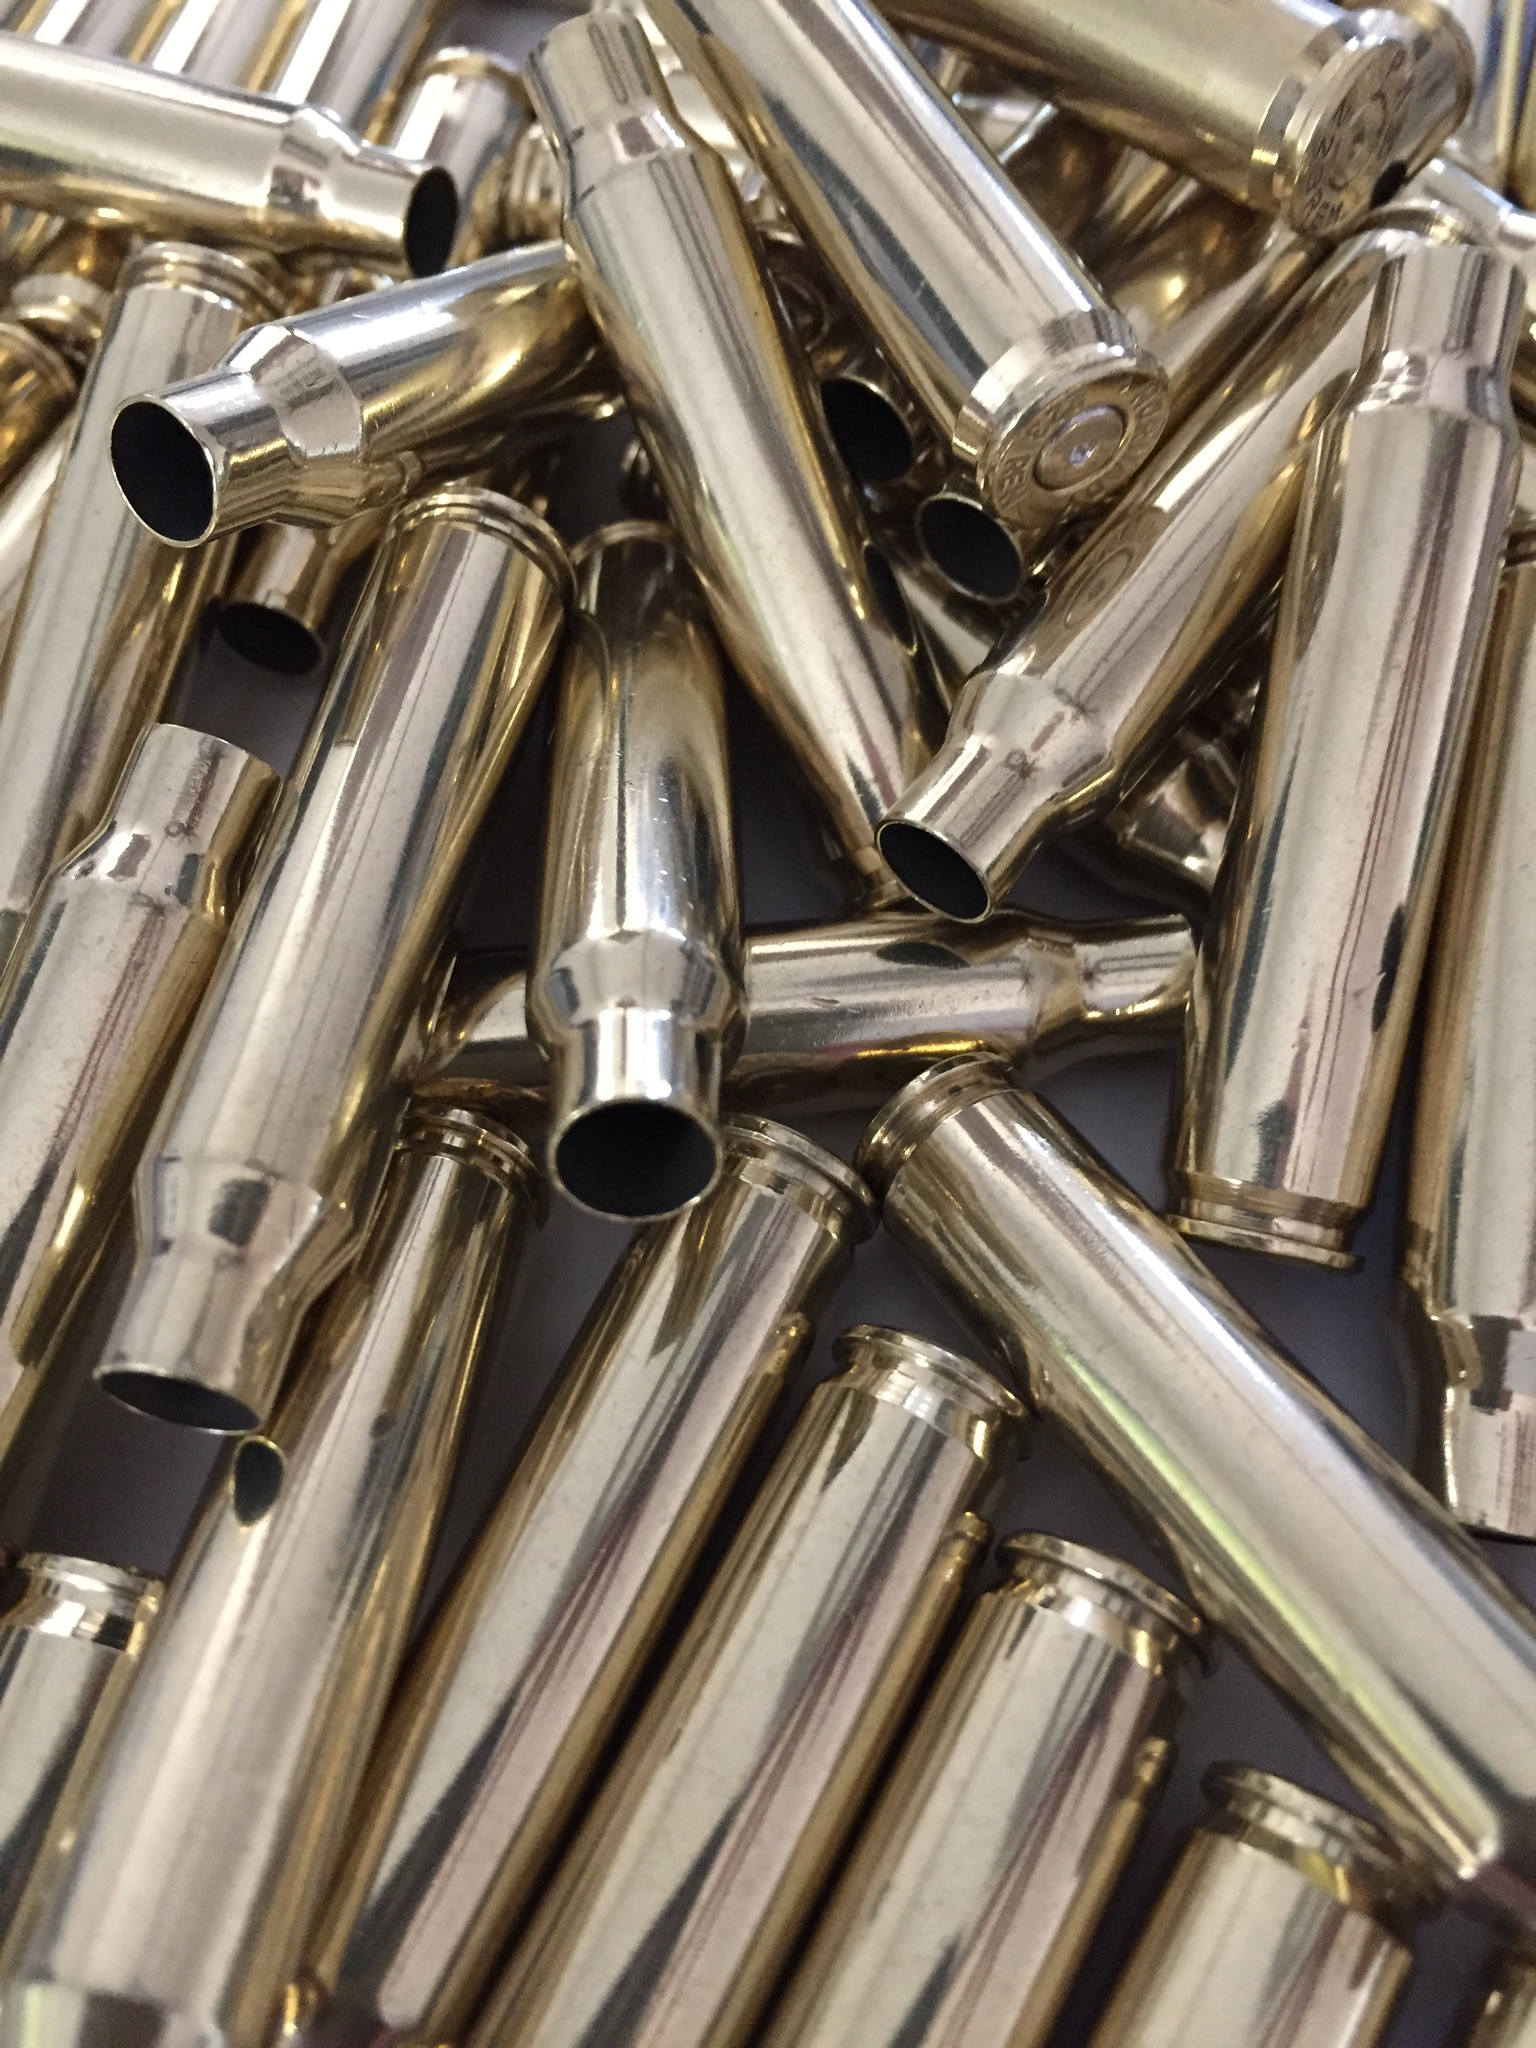 223 5.56 Polished Brass Shells Empty Spent Bullet Casings Used Cleaned ...